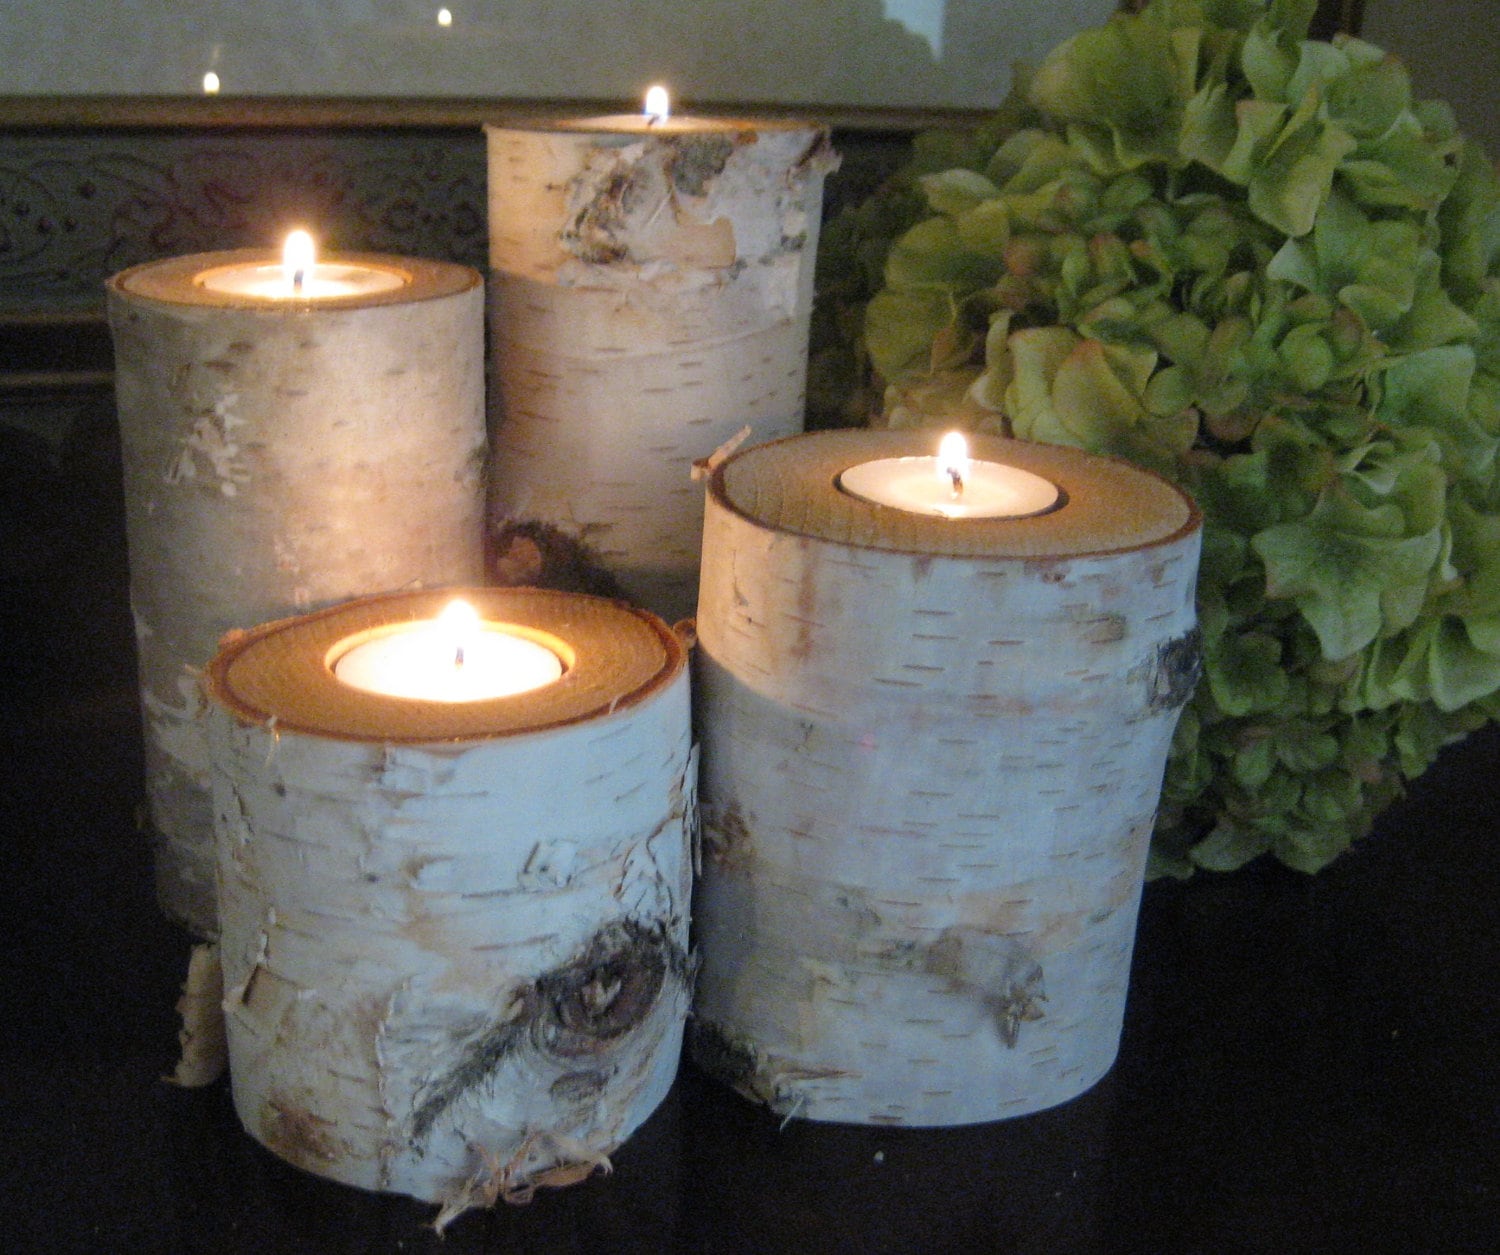 Birch Bark Log Tea Light Candle Holders Set of 4 - 5",4",3" , and 2" Tall Wedding Centerpieces Tablepieces Rustic Home Decor